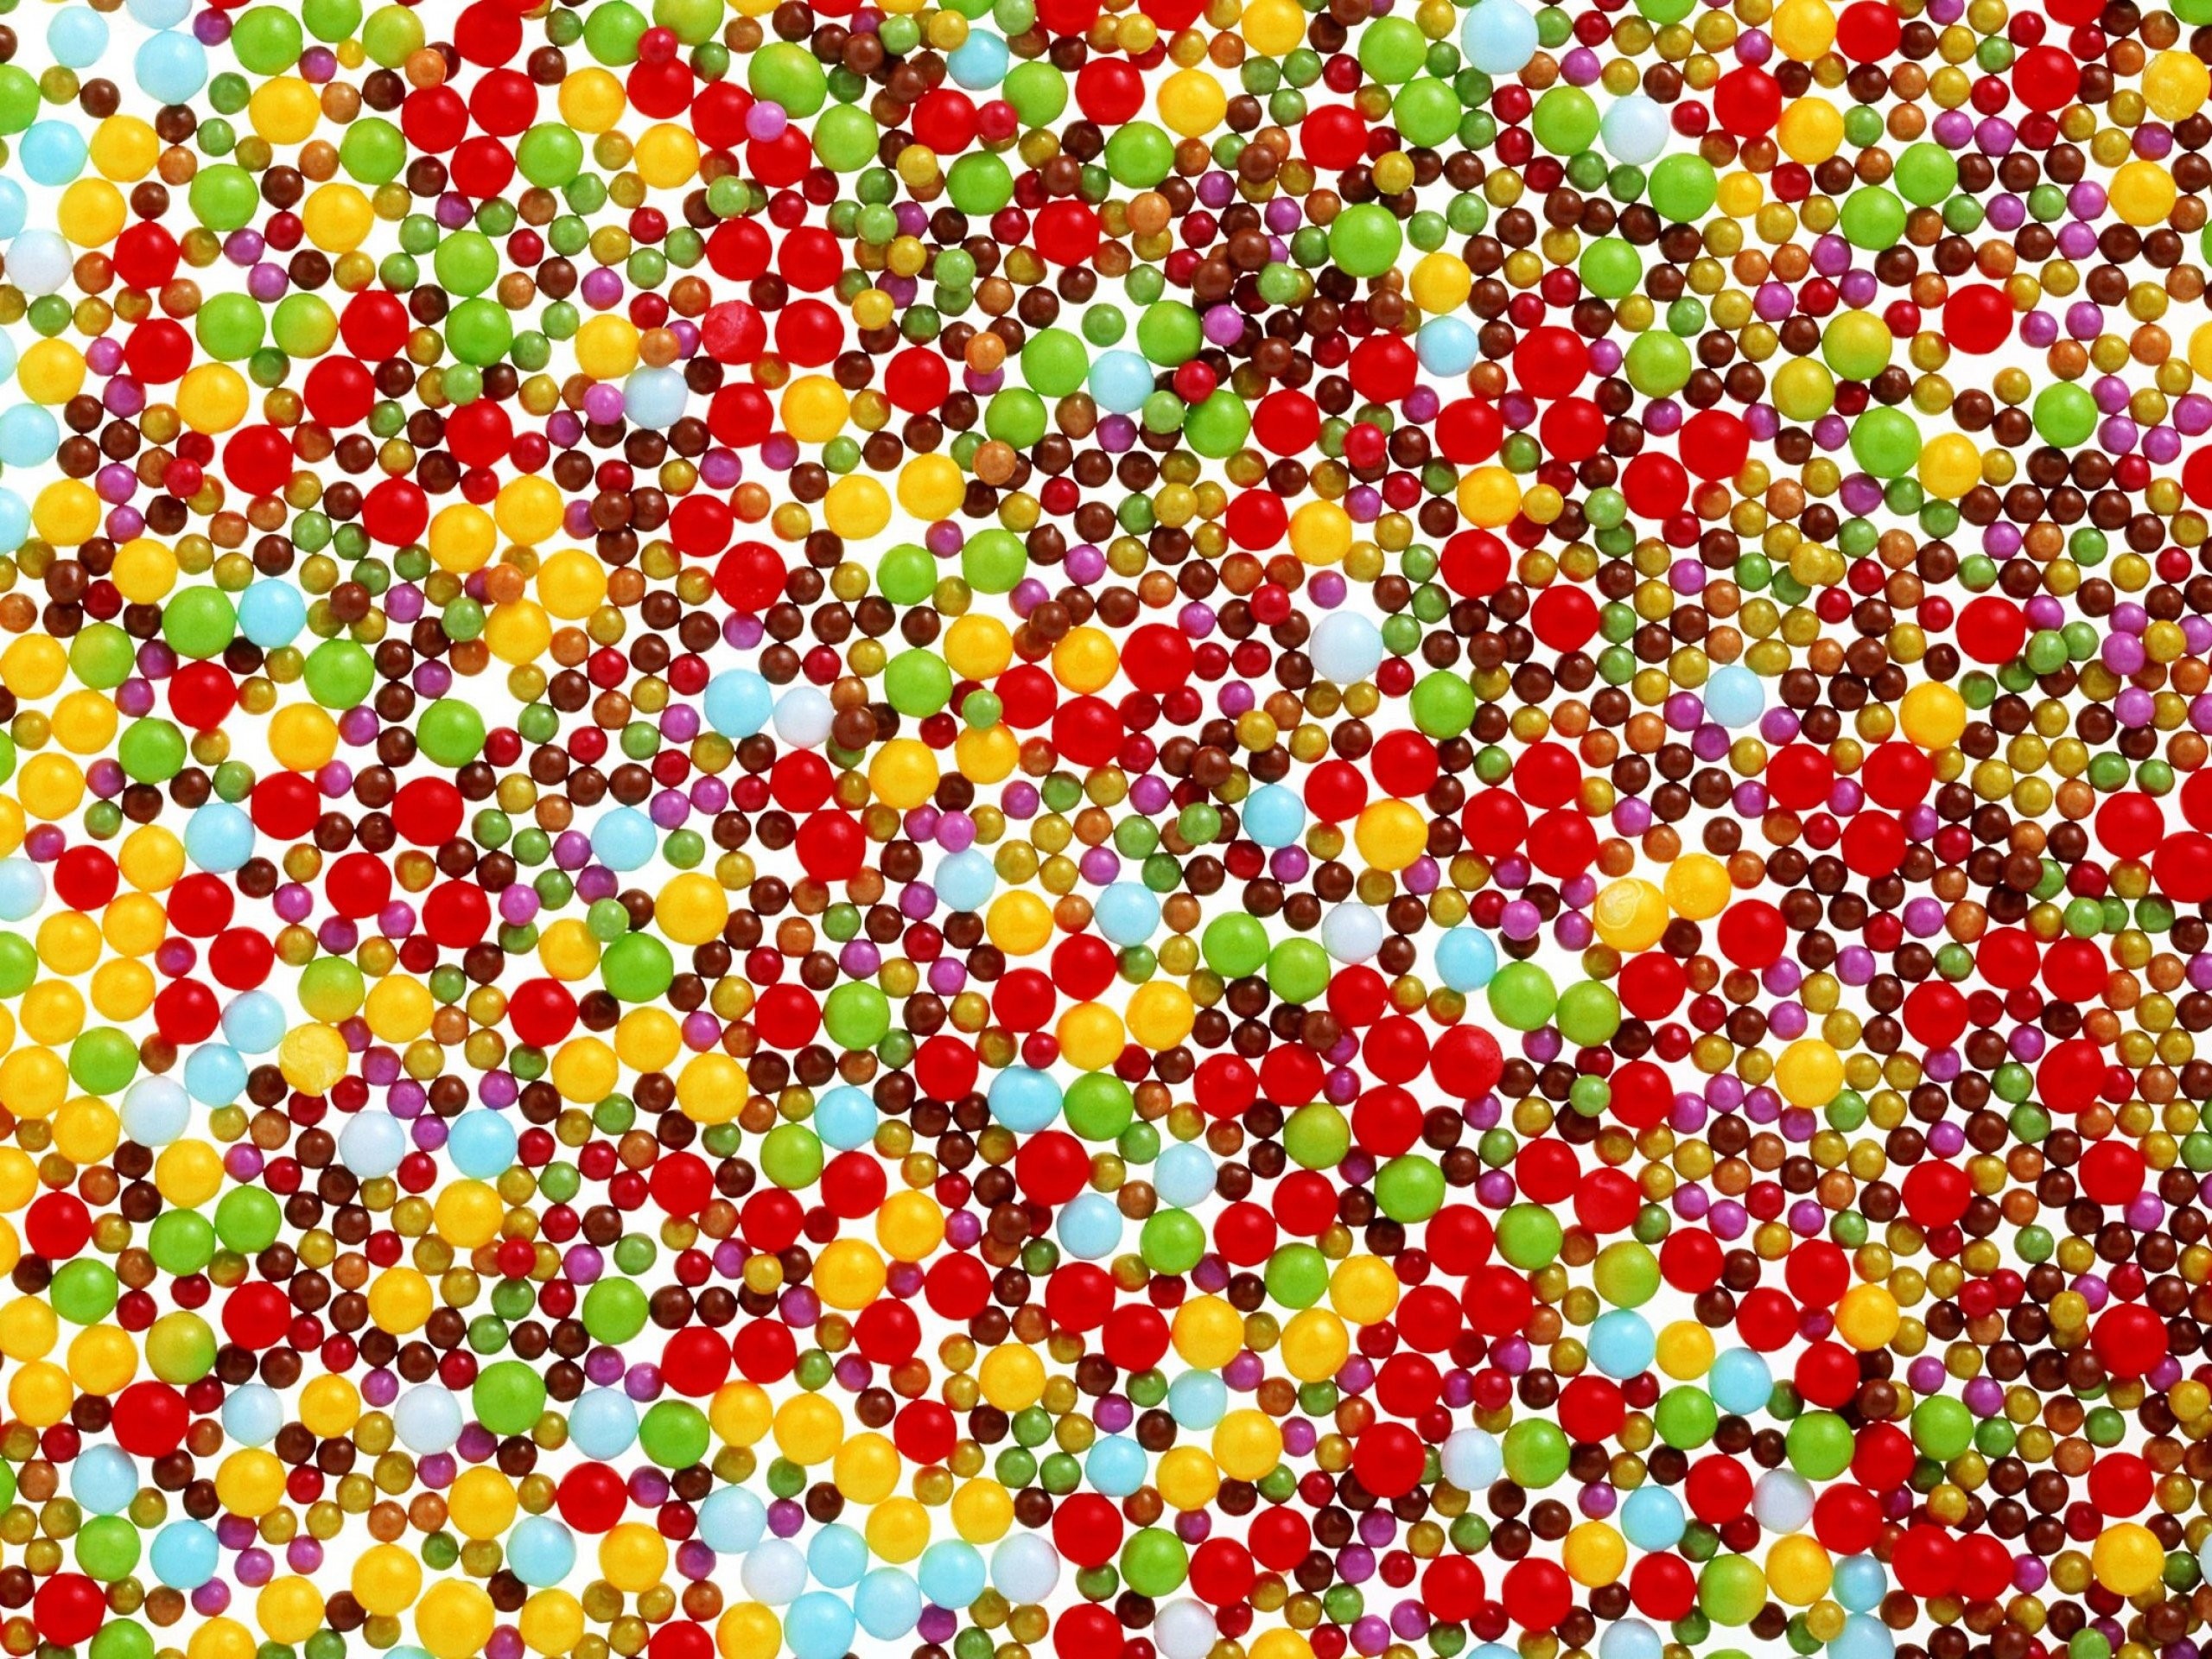 Abstract Wallpaper Art Colors Image Candies